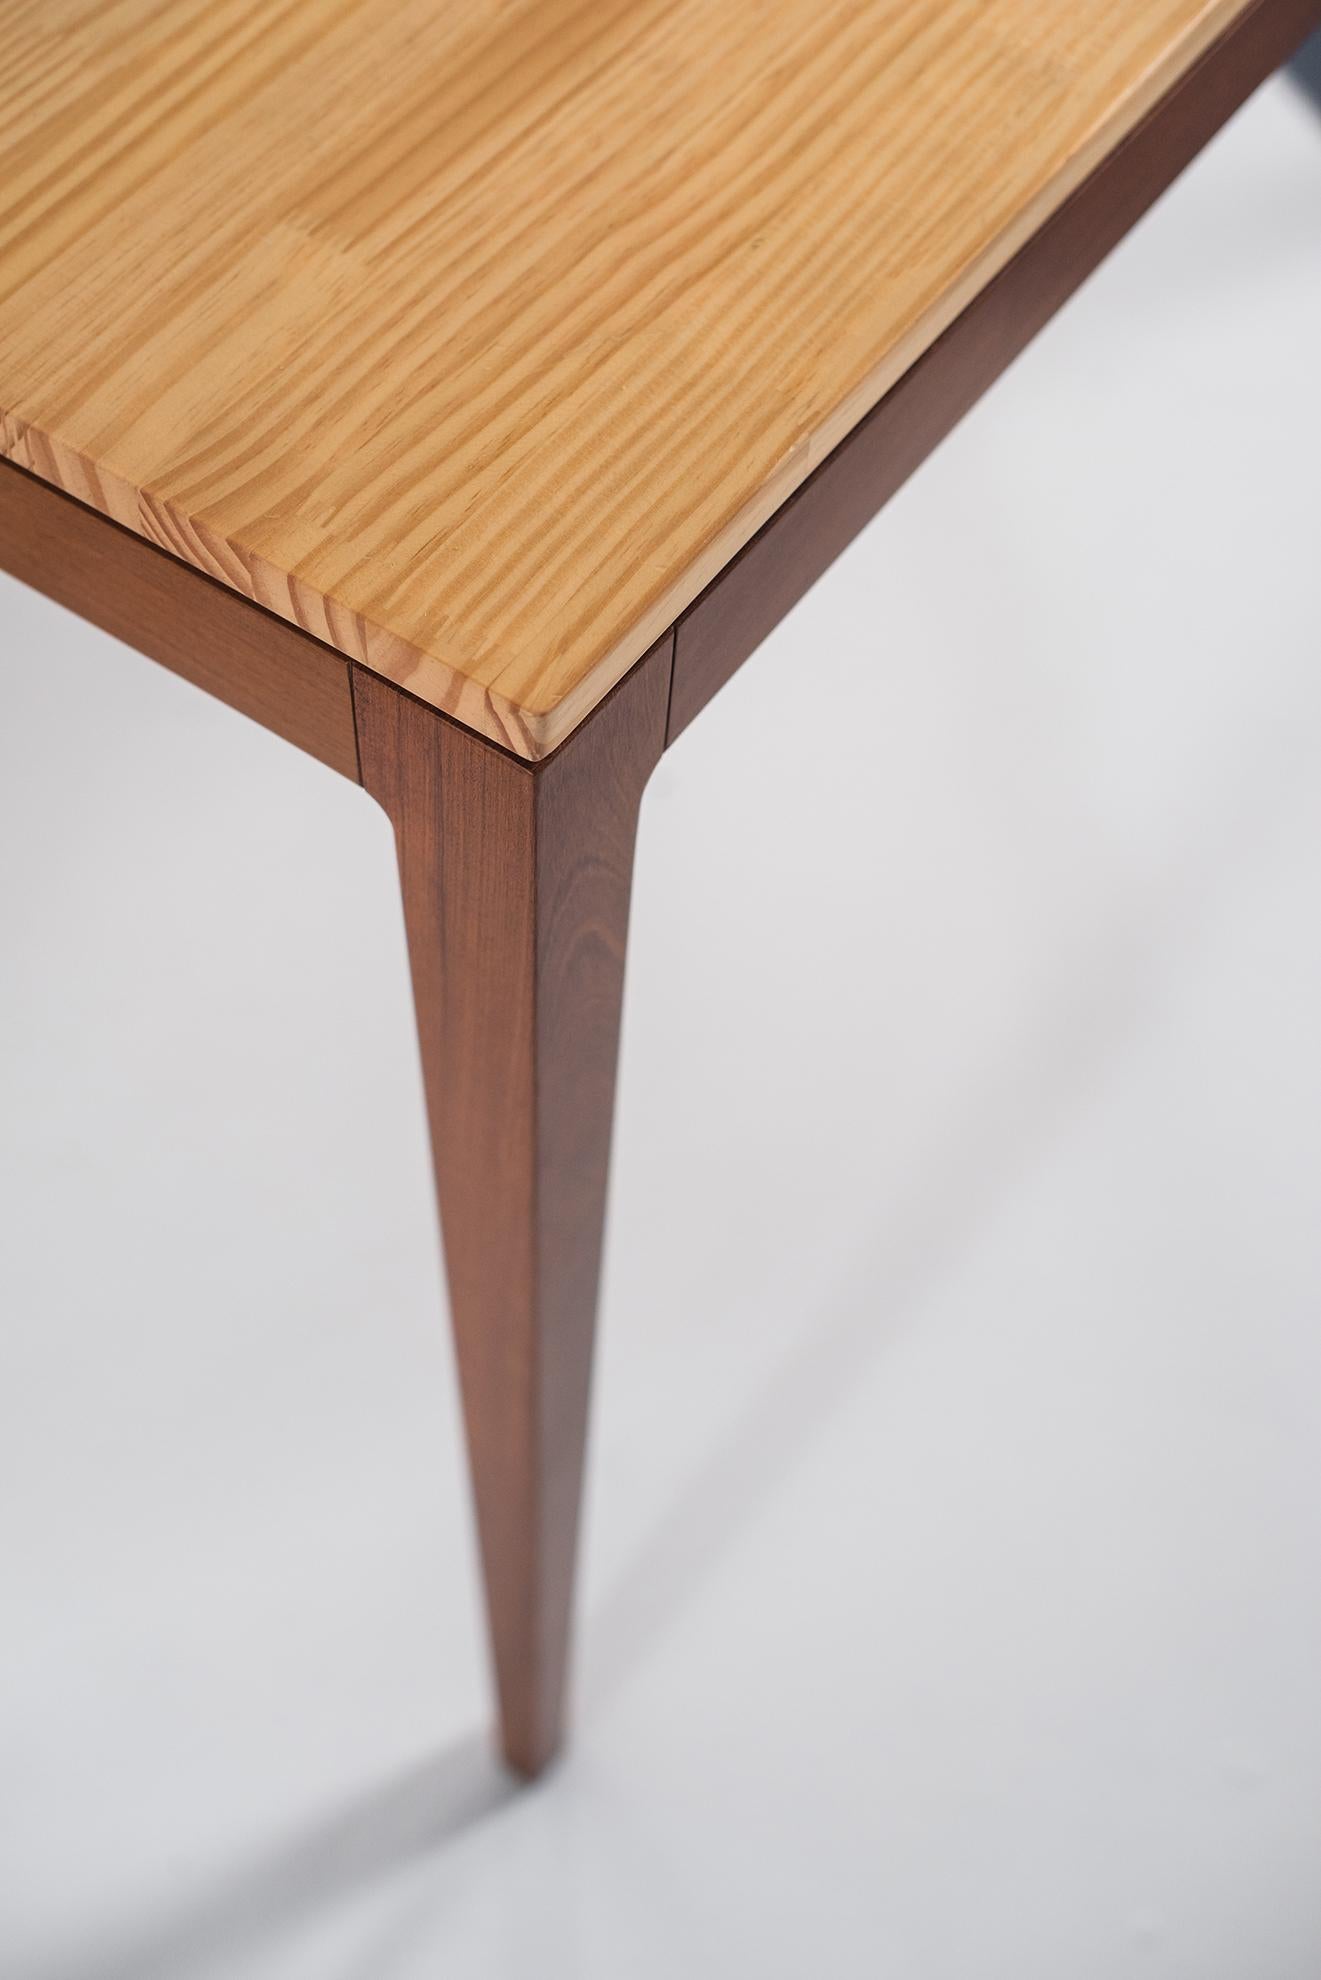 Contemporary Imirim Table For Sale